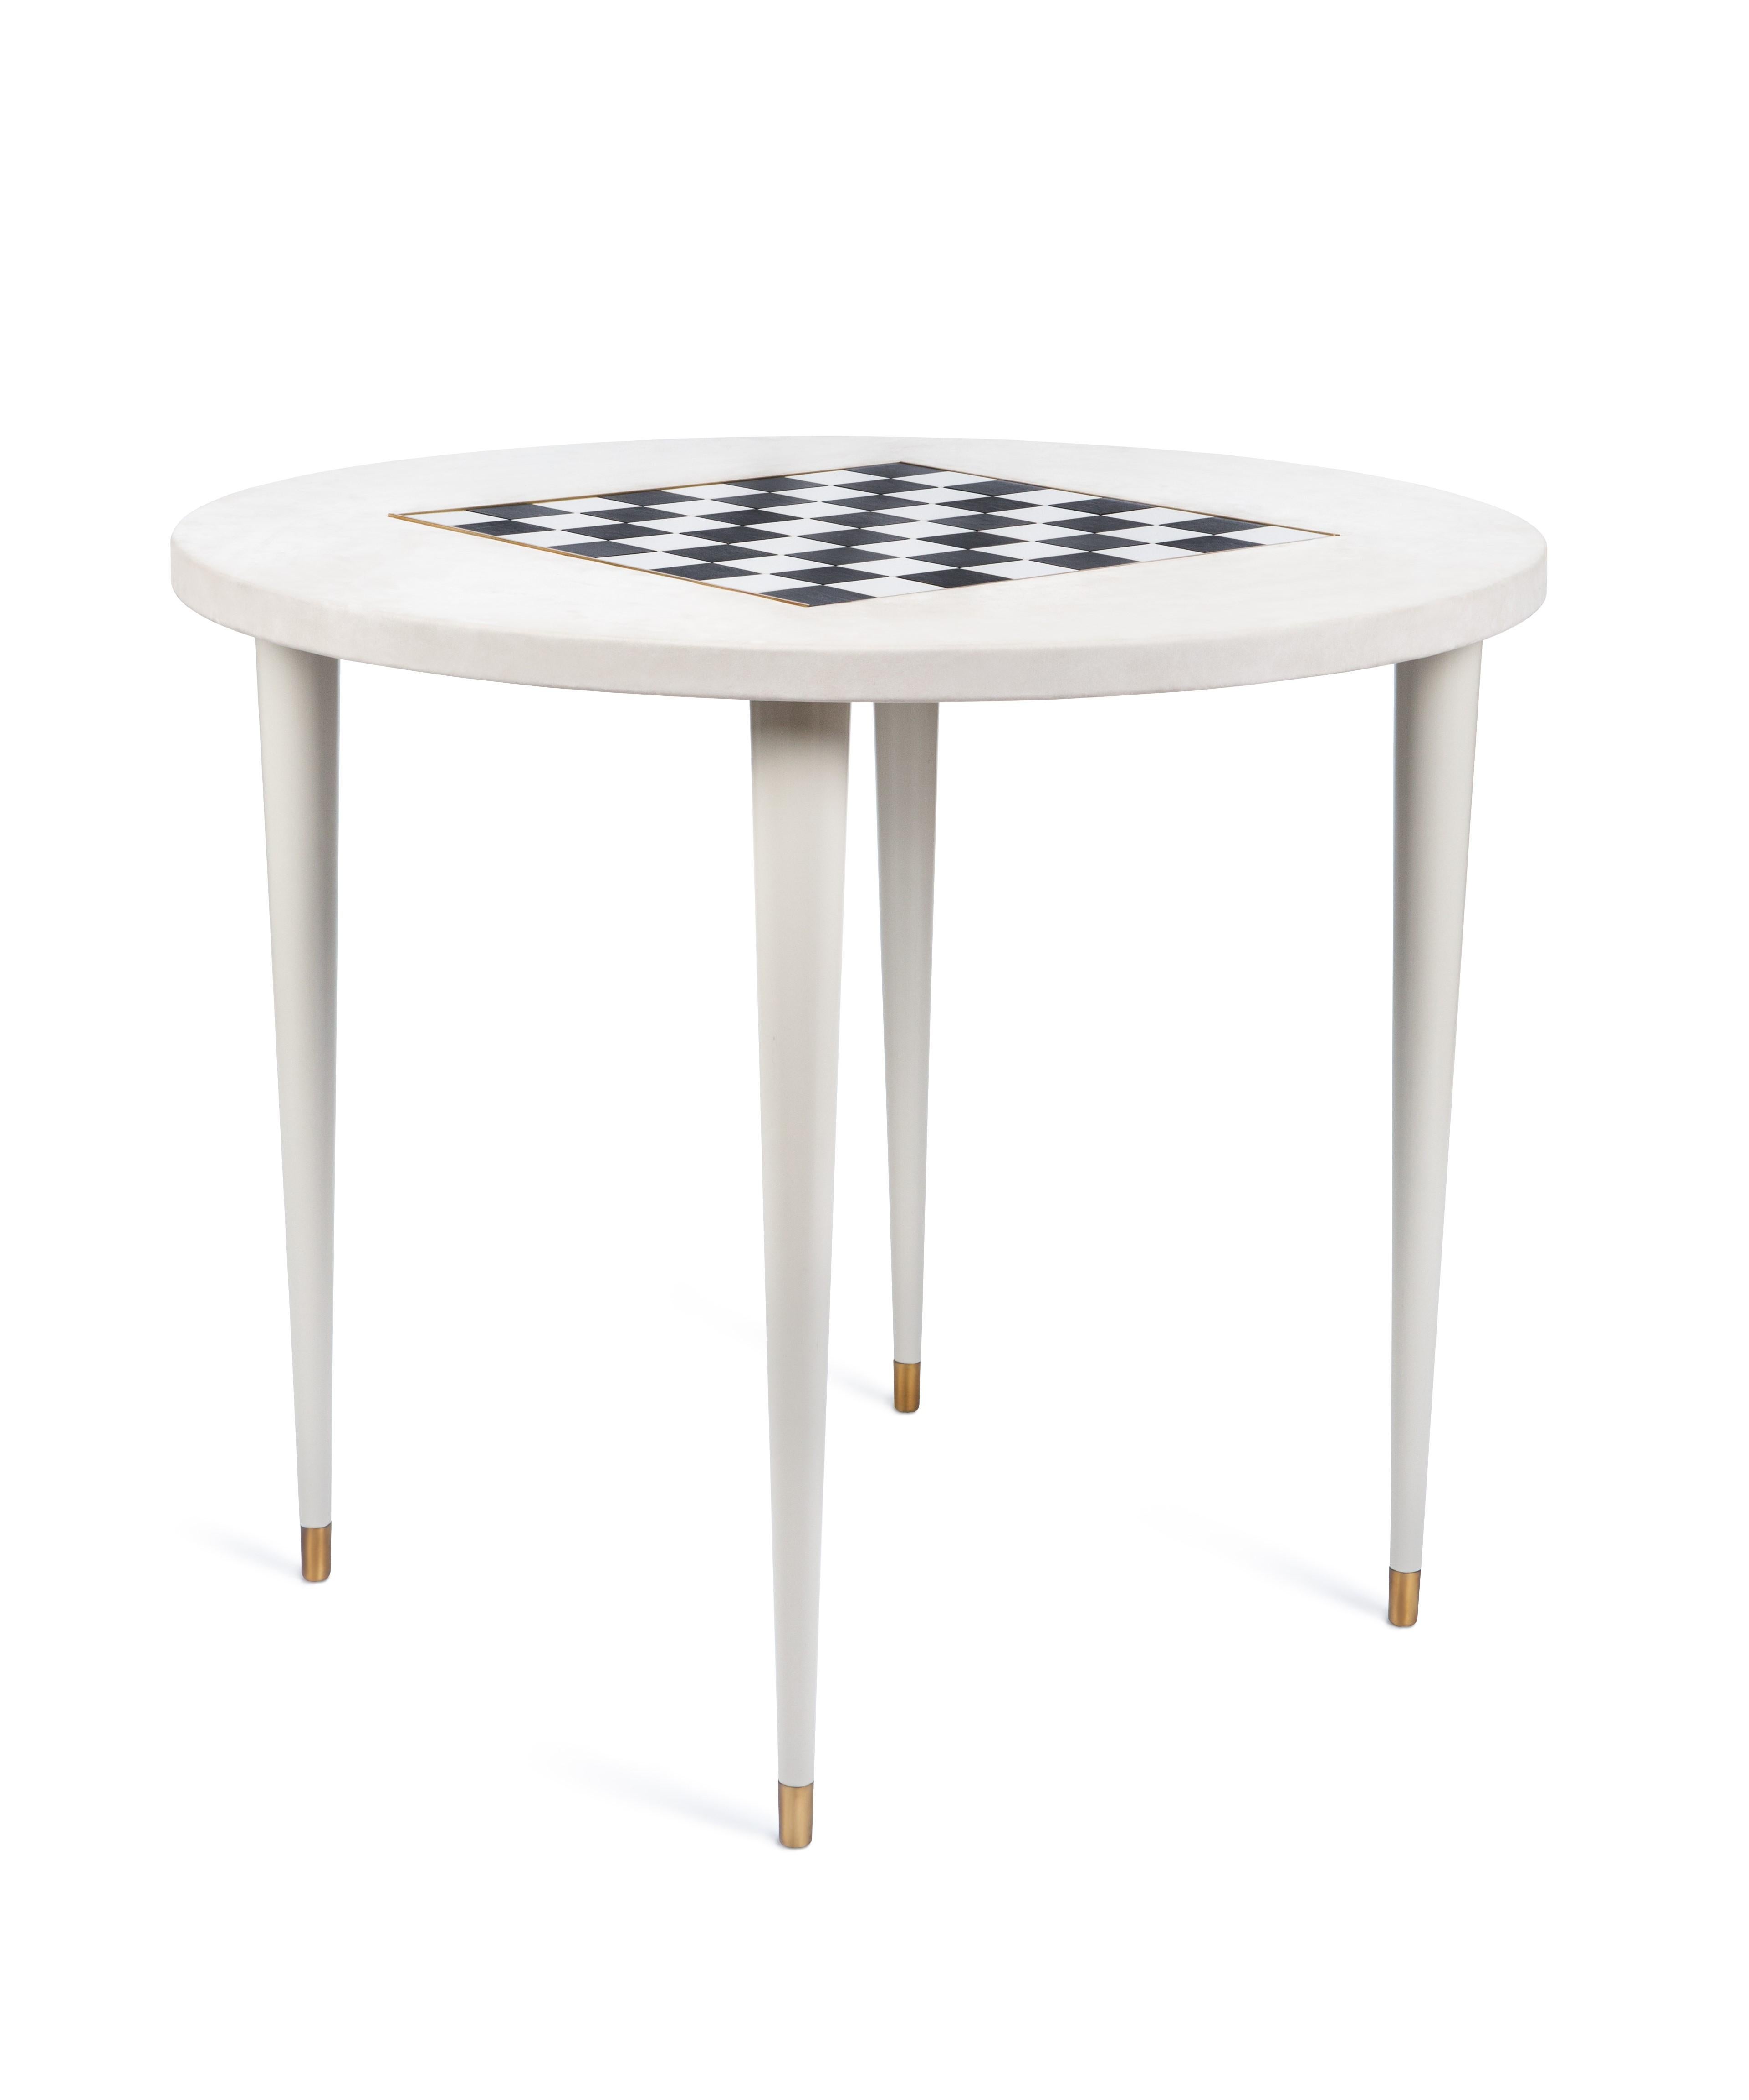 The elegant silhouette of the Non Smoking table is emphasized by the textured leather top and the embossed game board in black and white lacquer. The juxtaposition of contrasting materials gives a modern look to its classic and deceptively simple